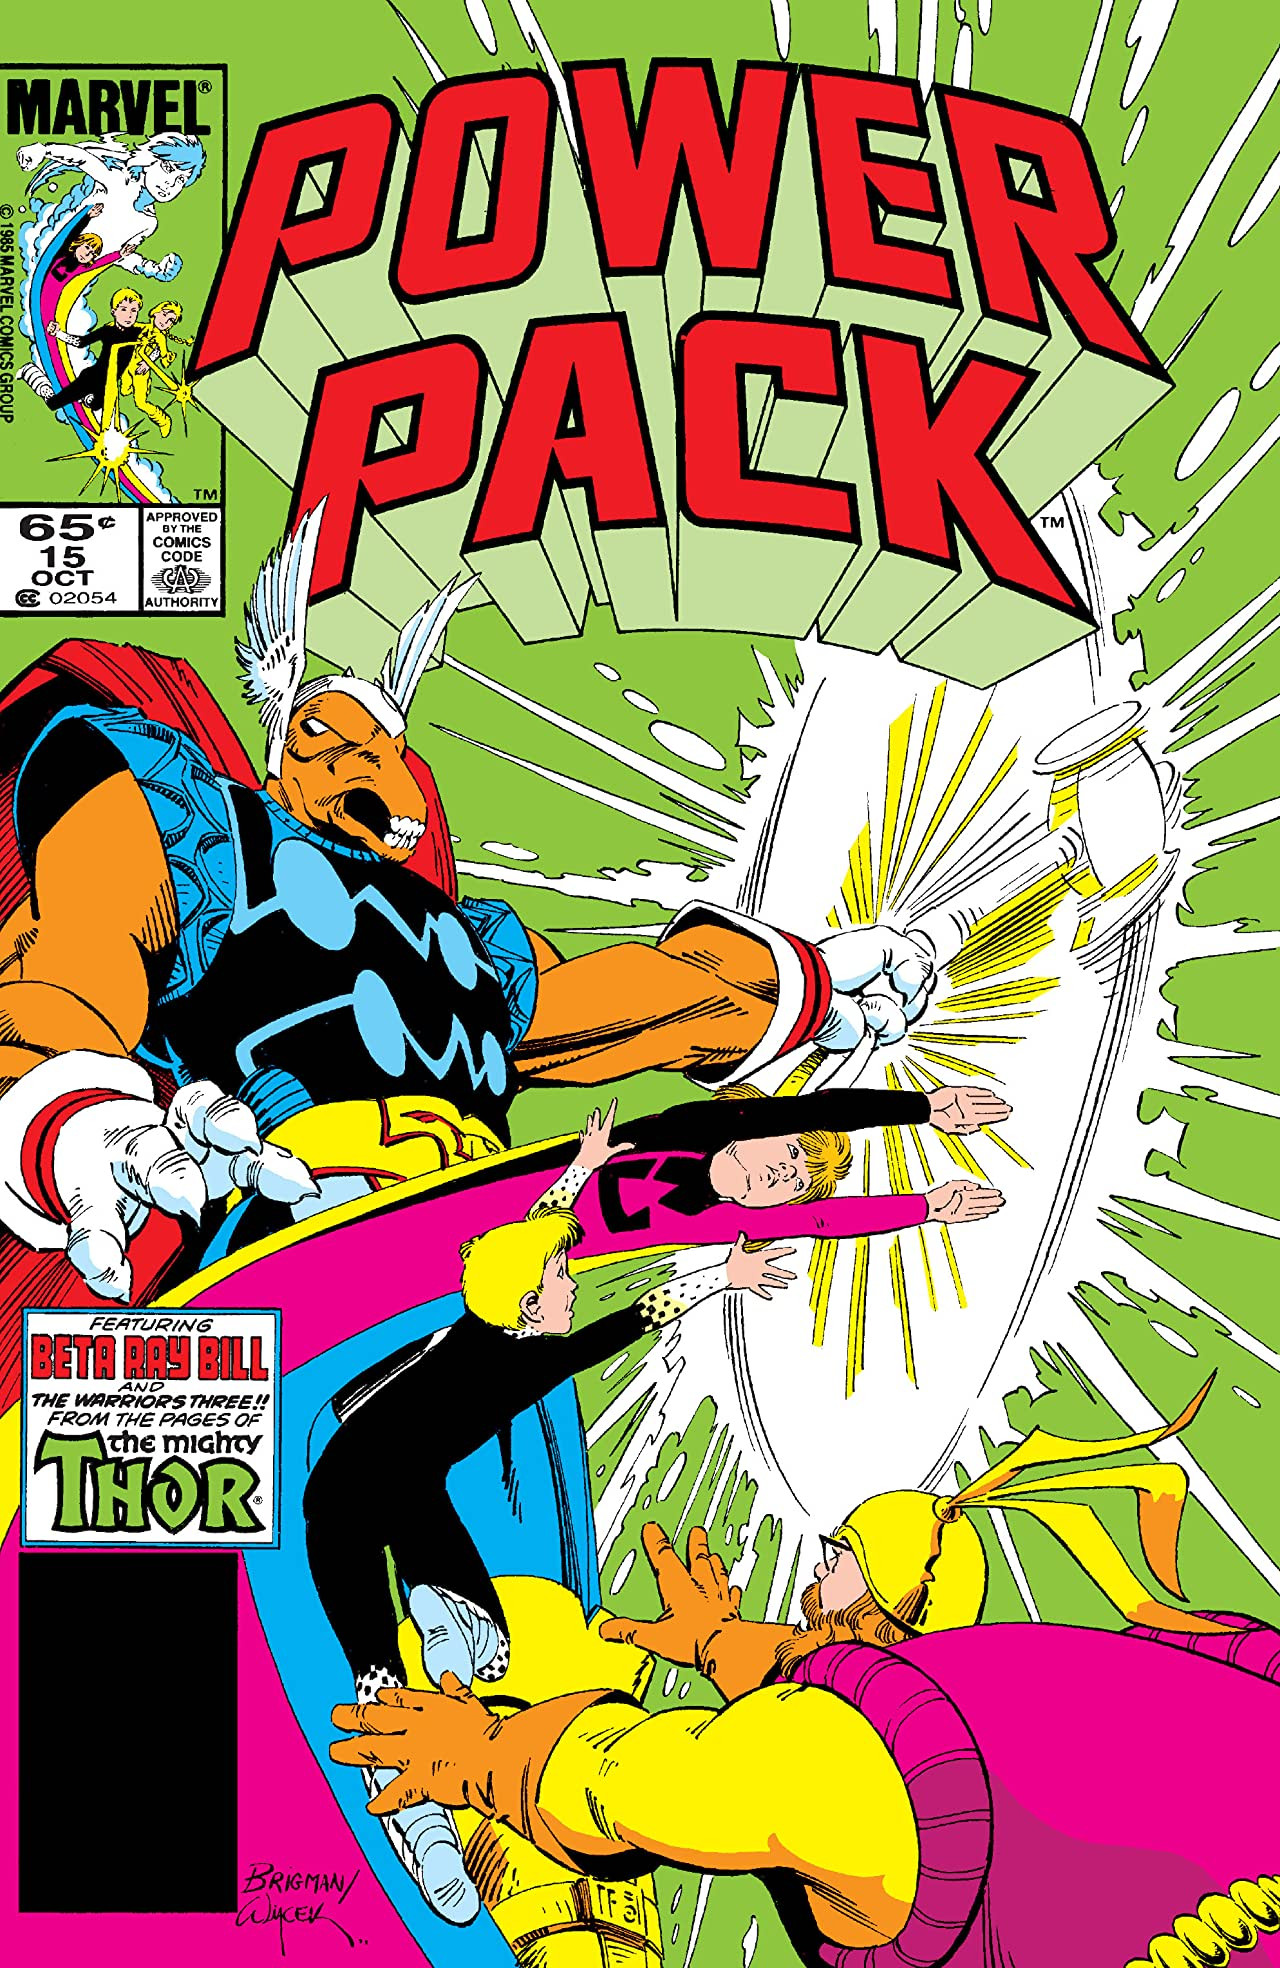 Power Pack Vol 1 15 Marvel Database Fandom Powered By Wikia 